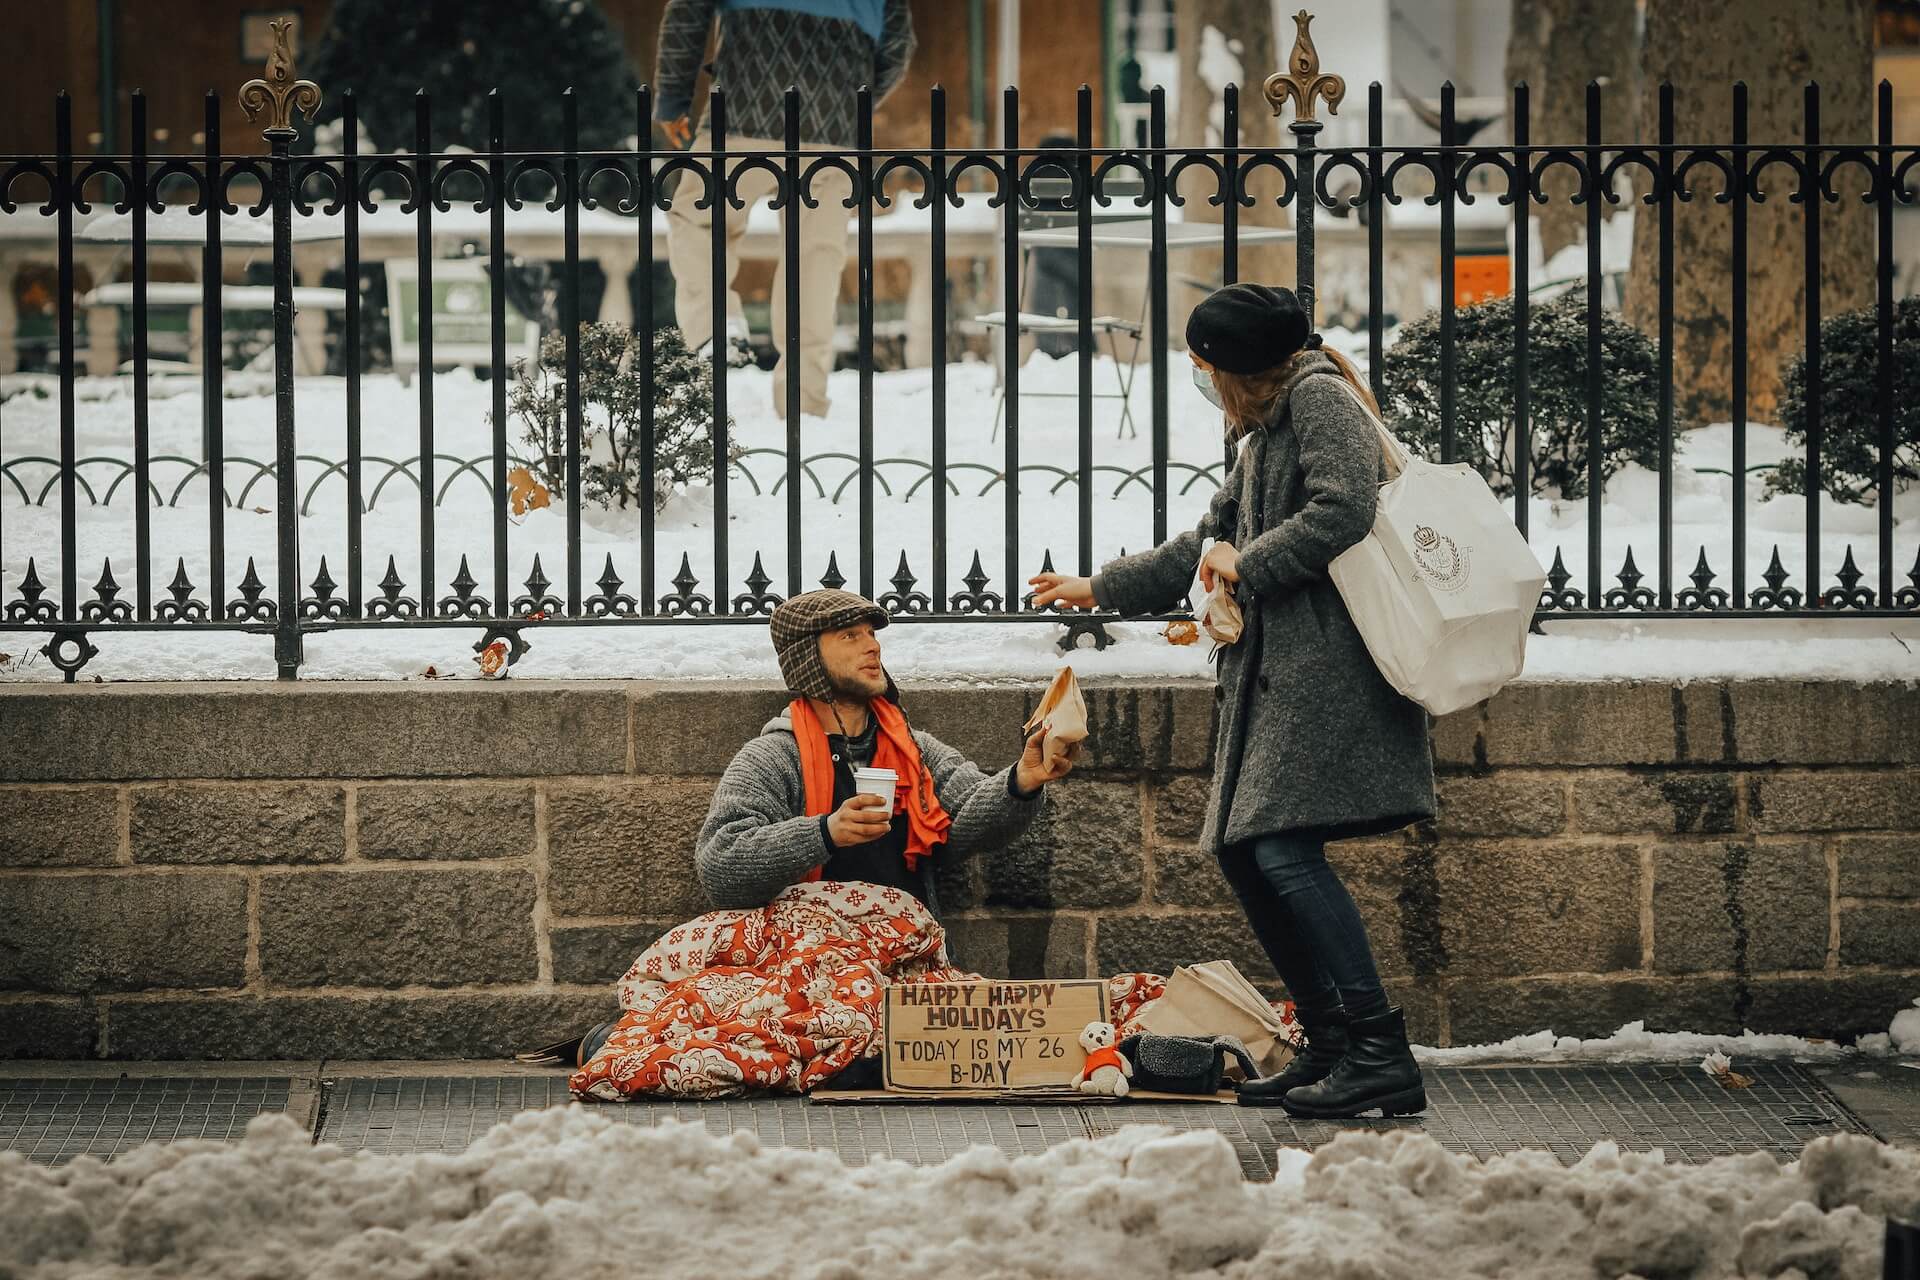 110 Random Acts of Kindness Ideas to Pay it Forward